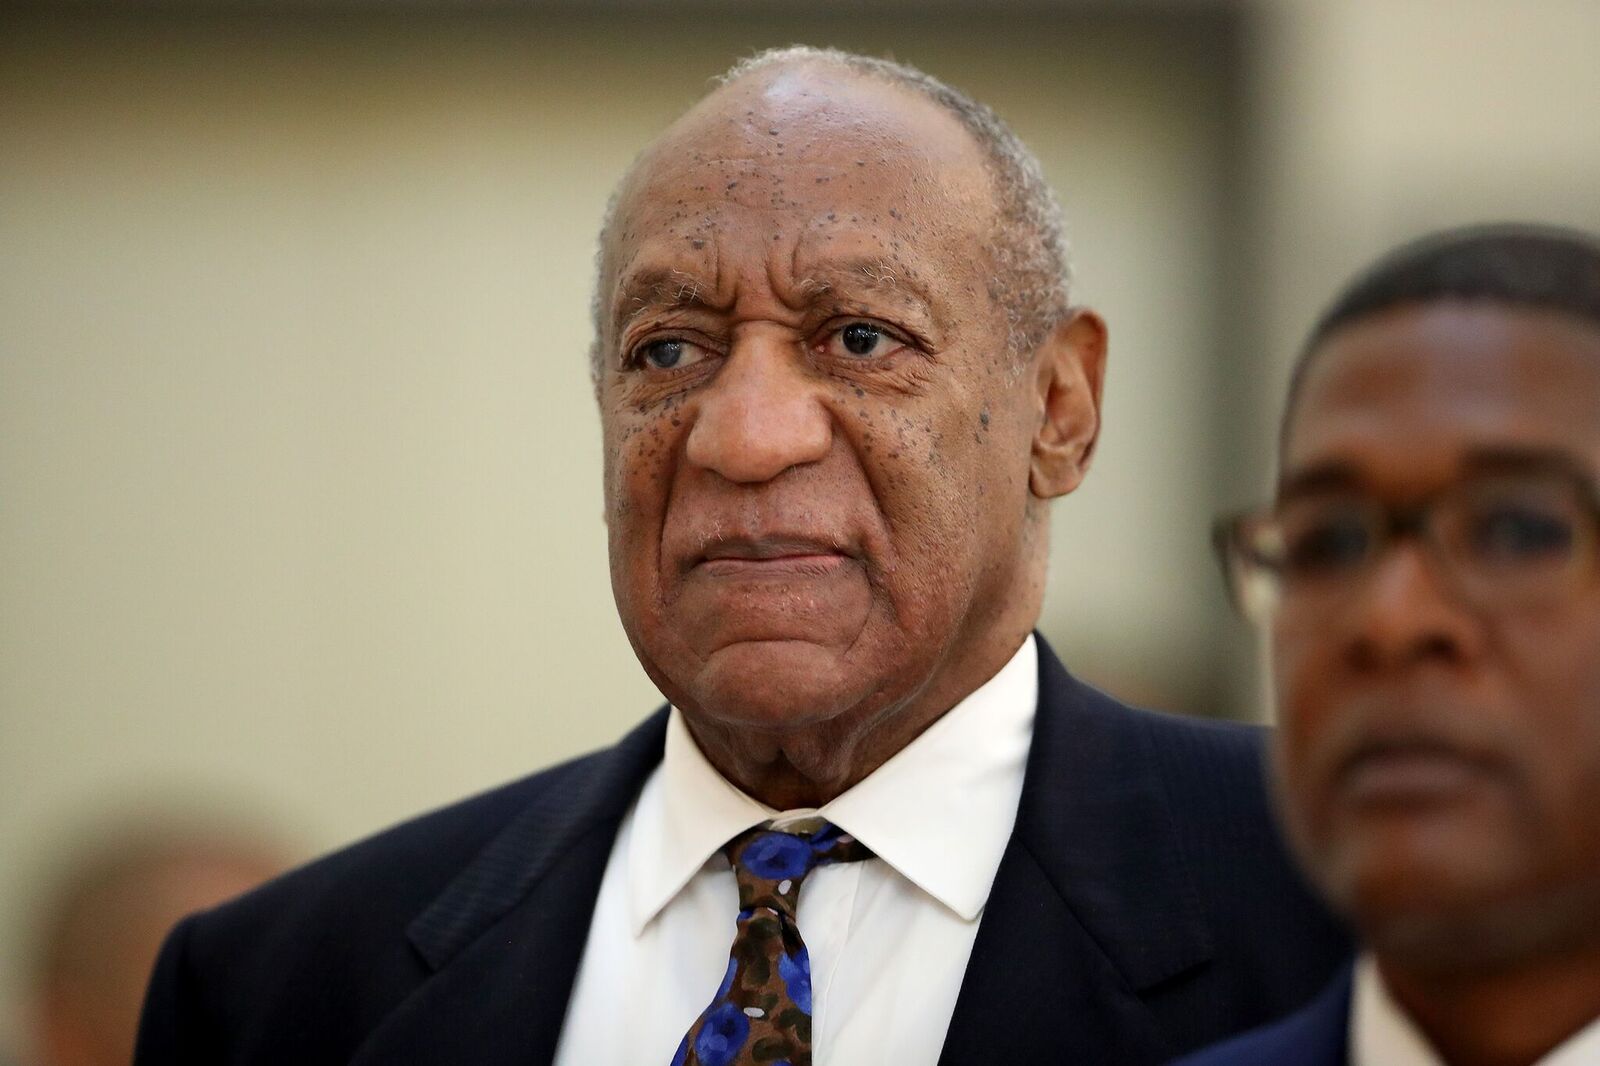 Bill Cosby and his spokesperson, Andrew Wyatt in the courtroom during his trial sentencing in September 2018. | Photo: Getty Images